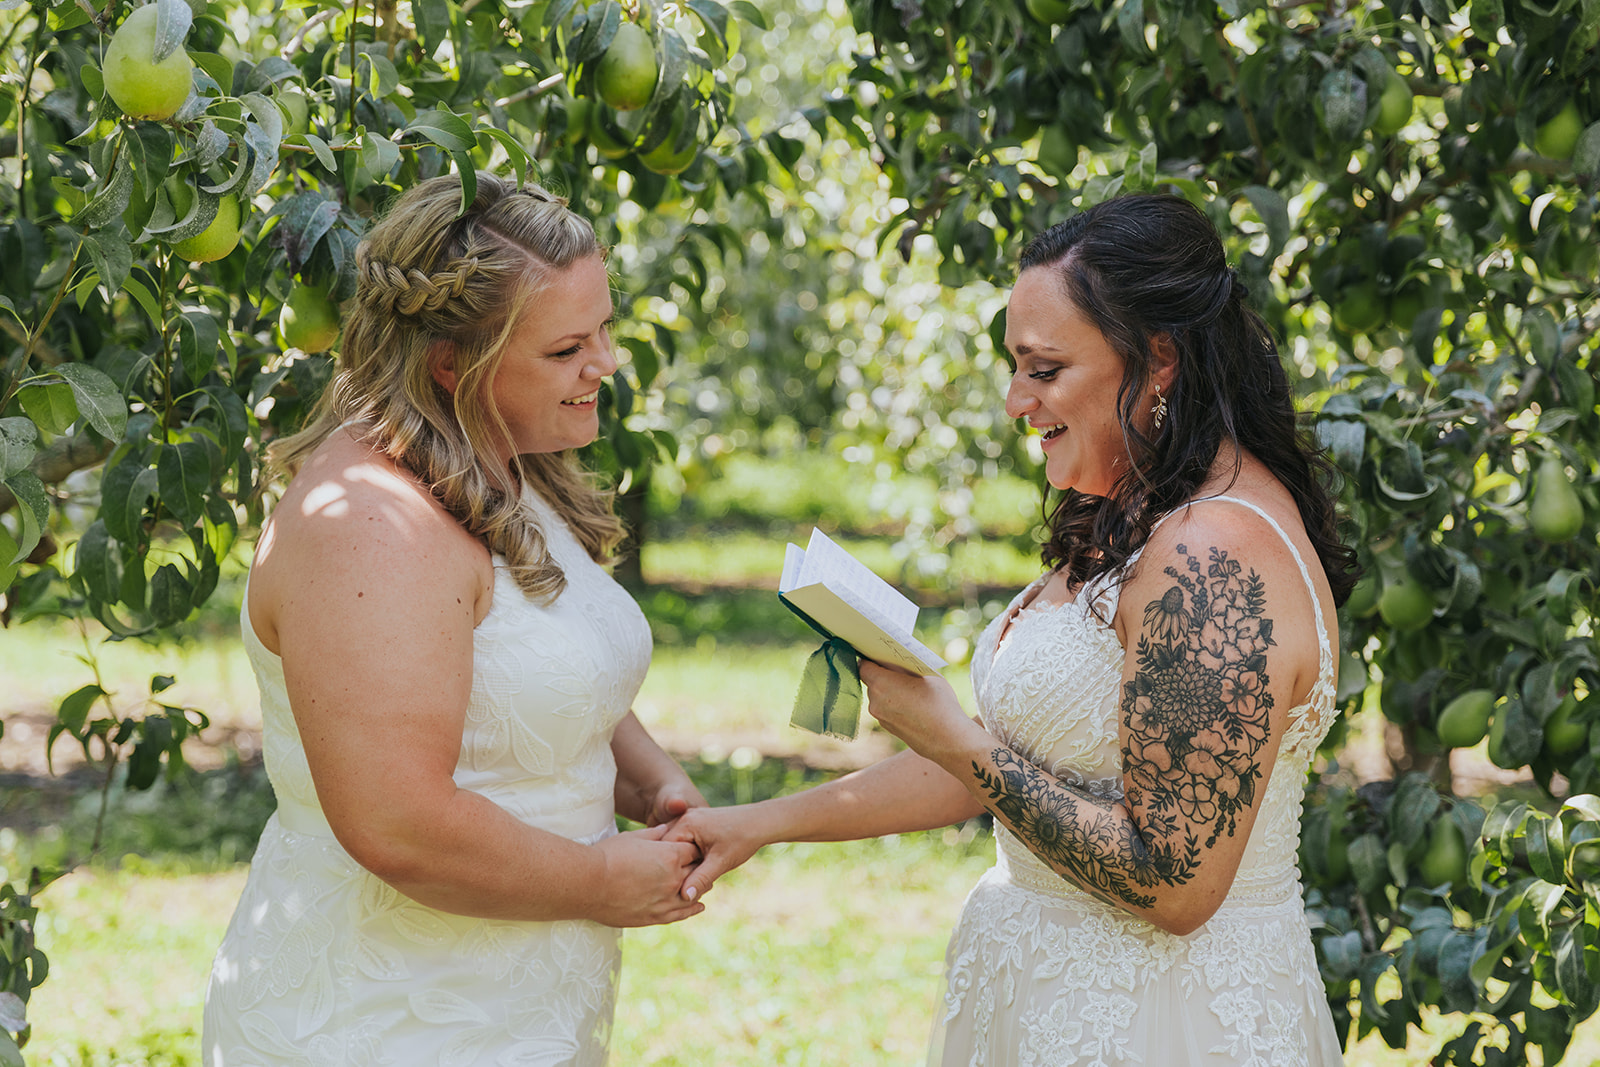 Two brides hold hands in a a pear orchard as they share private vows on their wedding day